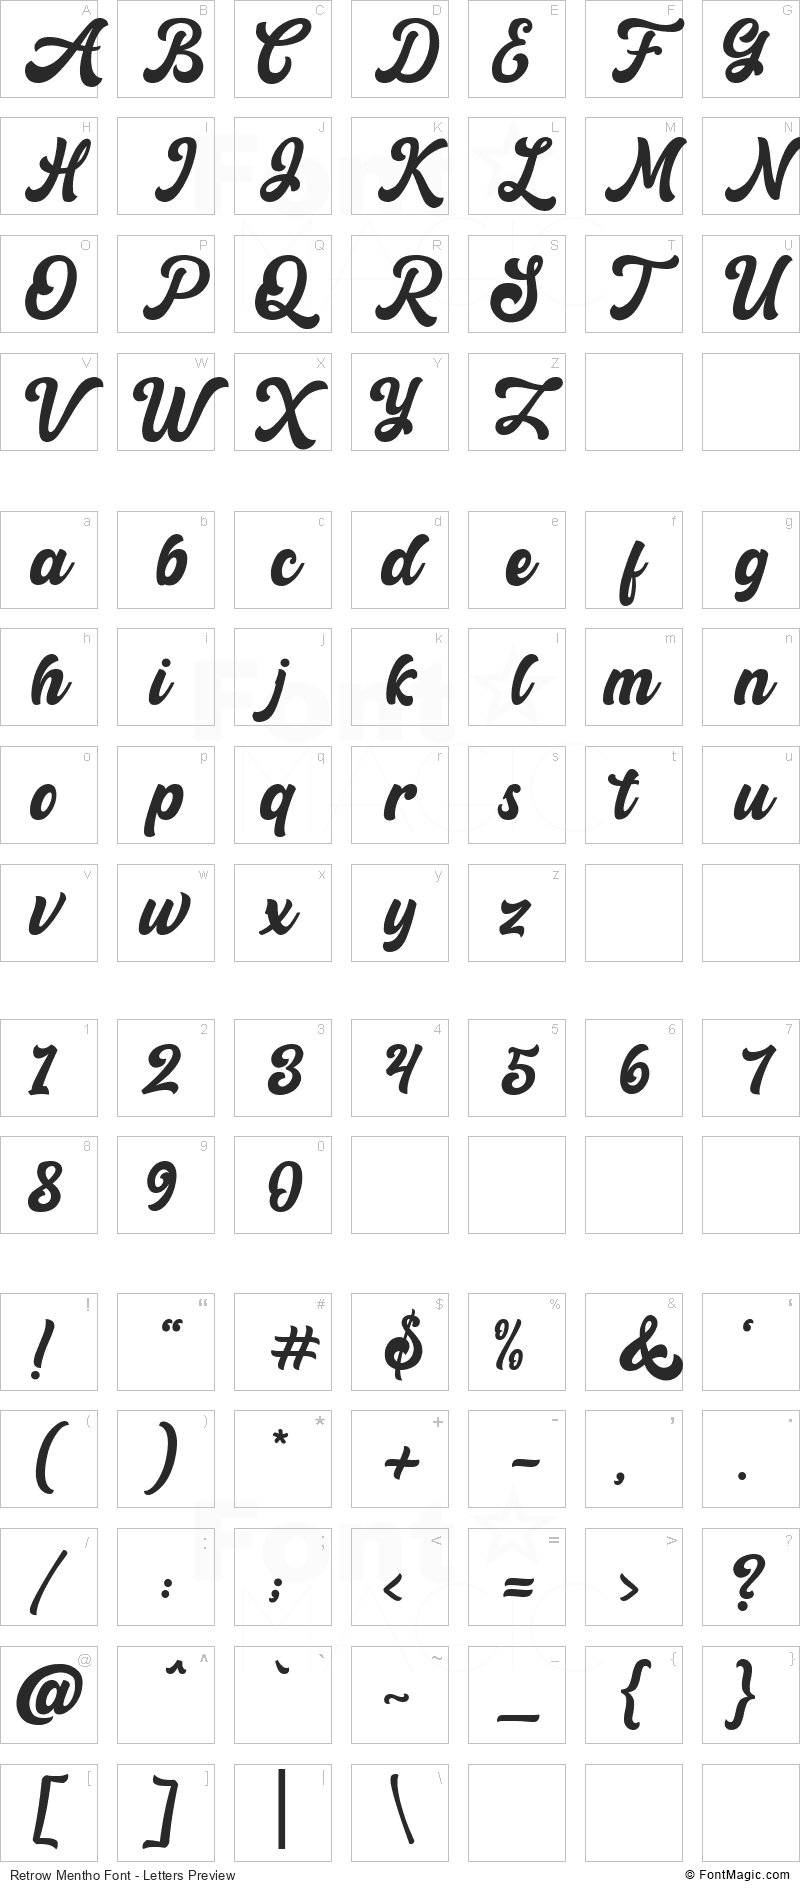 Retrow Mentho Font - All Latters Preview Chart